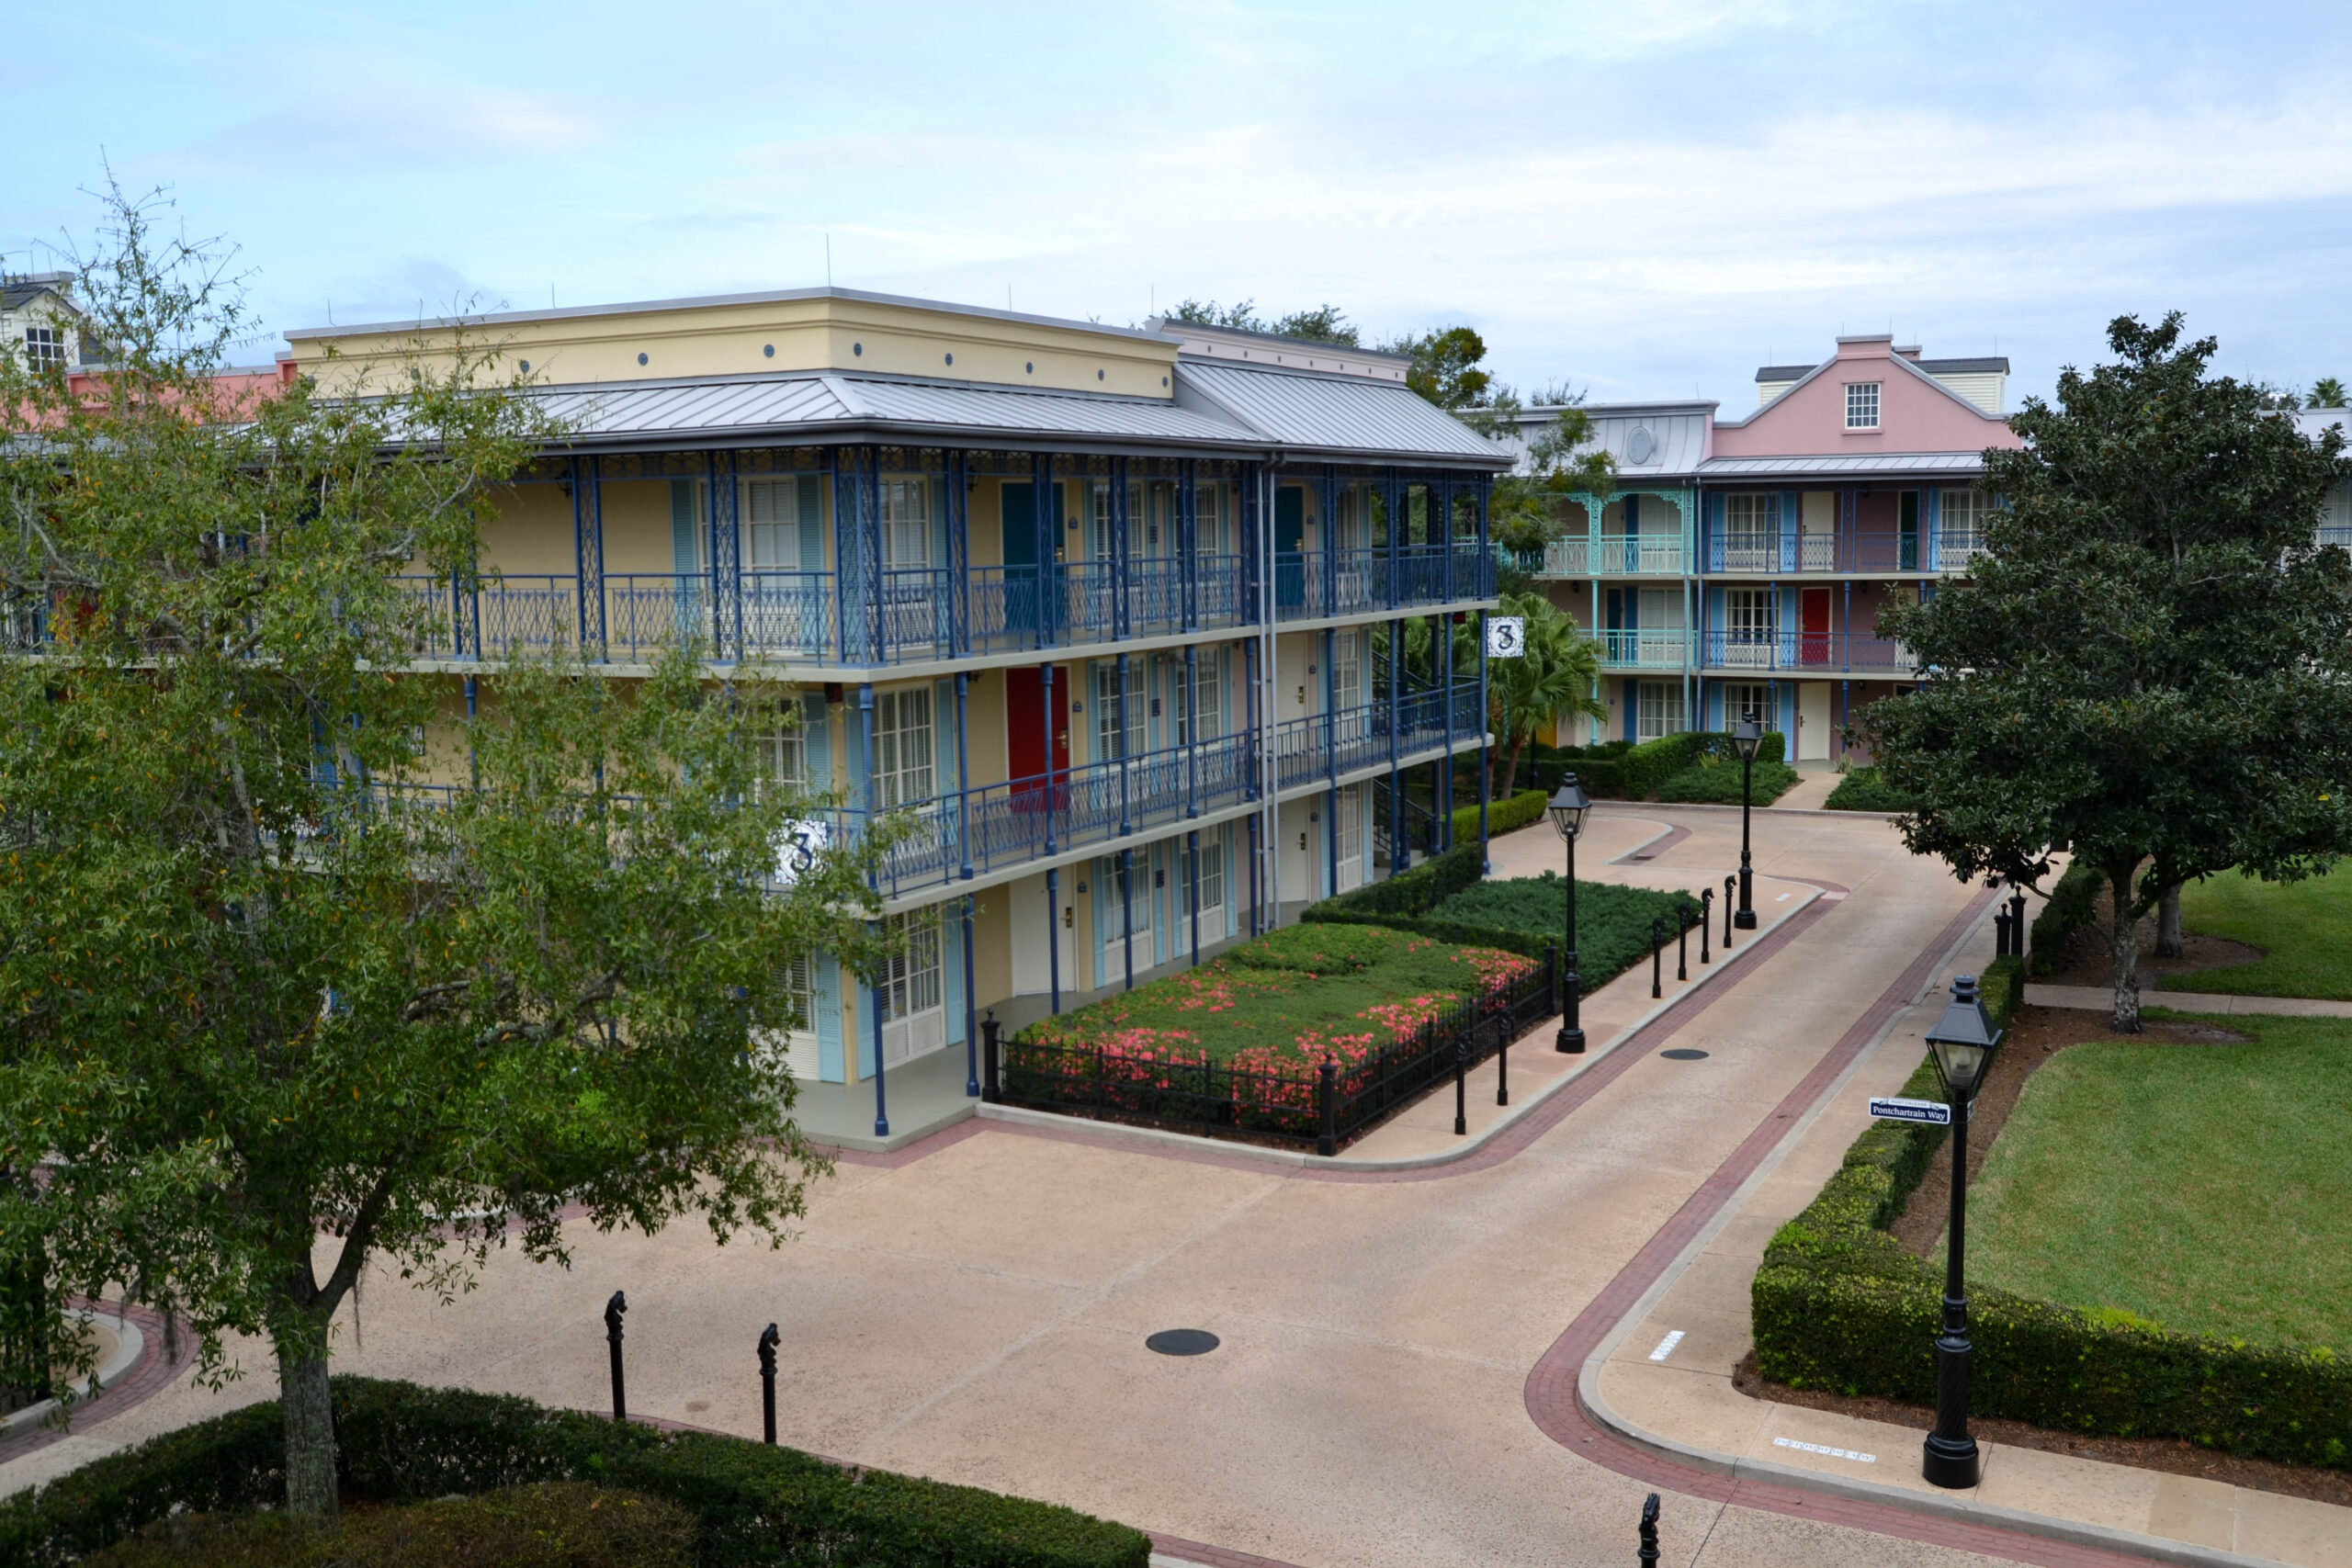 In Day One Port Orleans – French Quarter